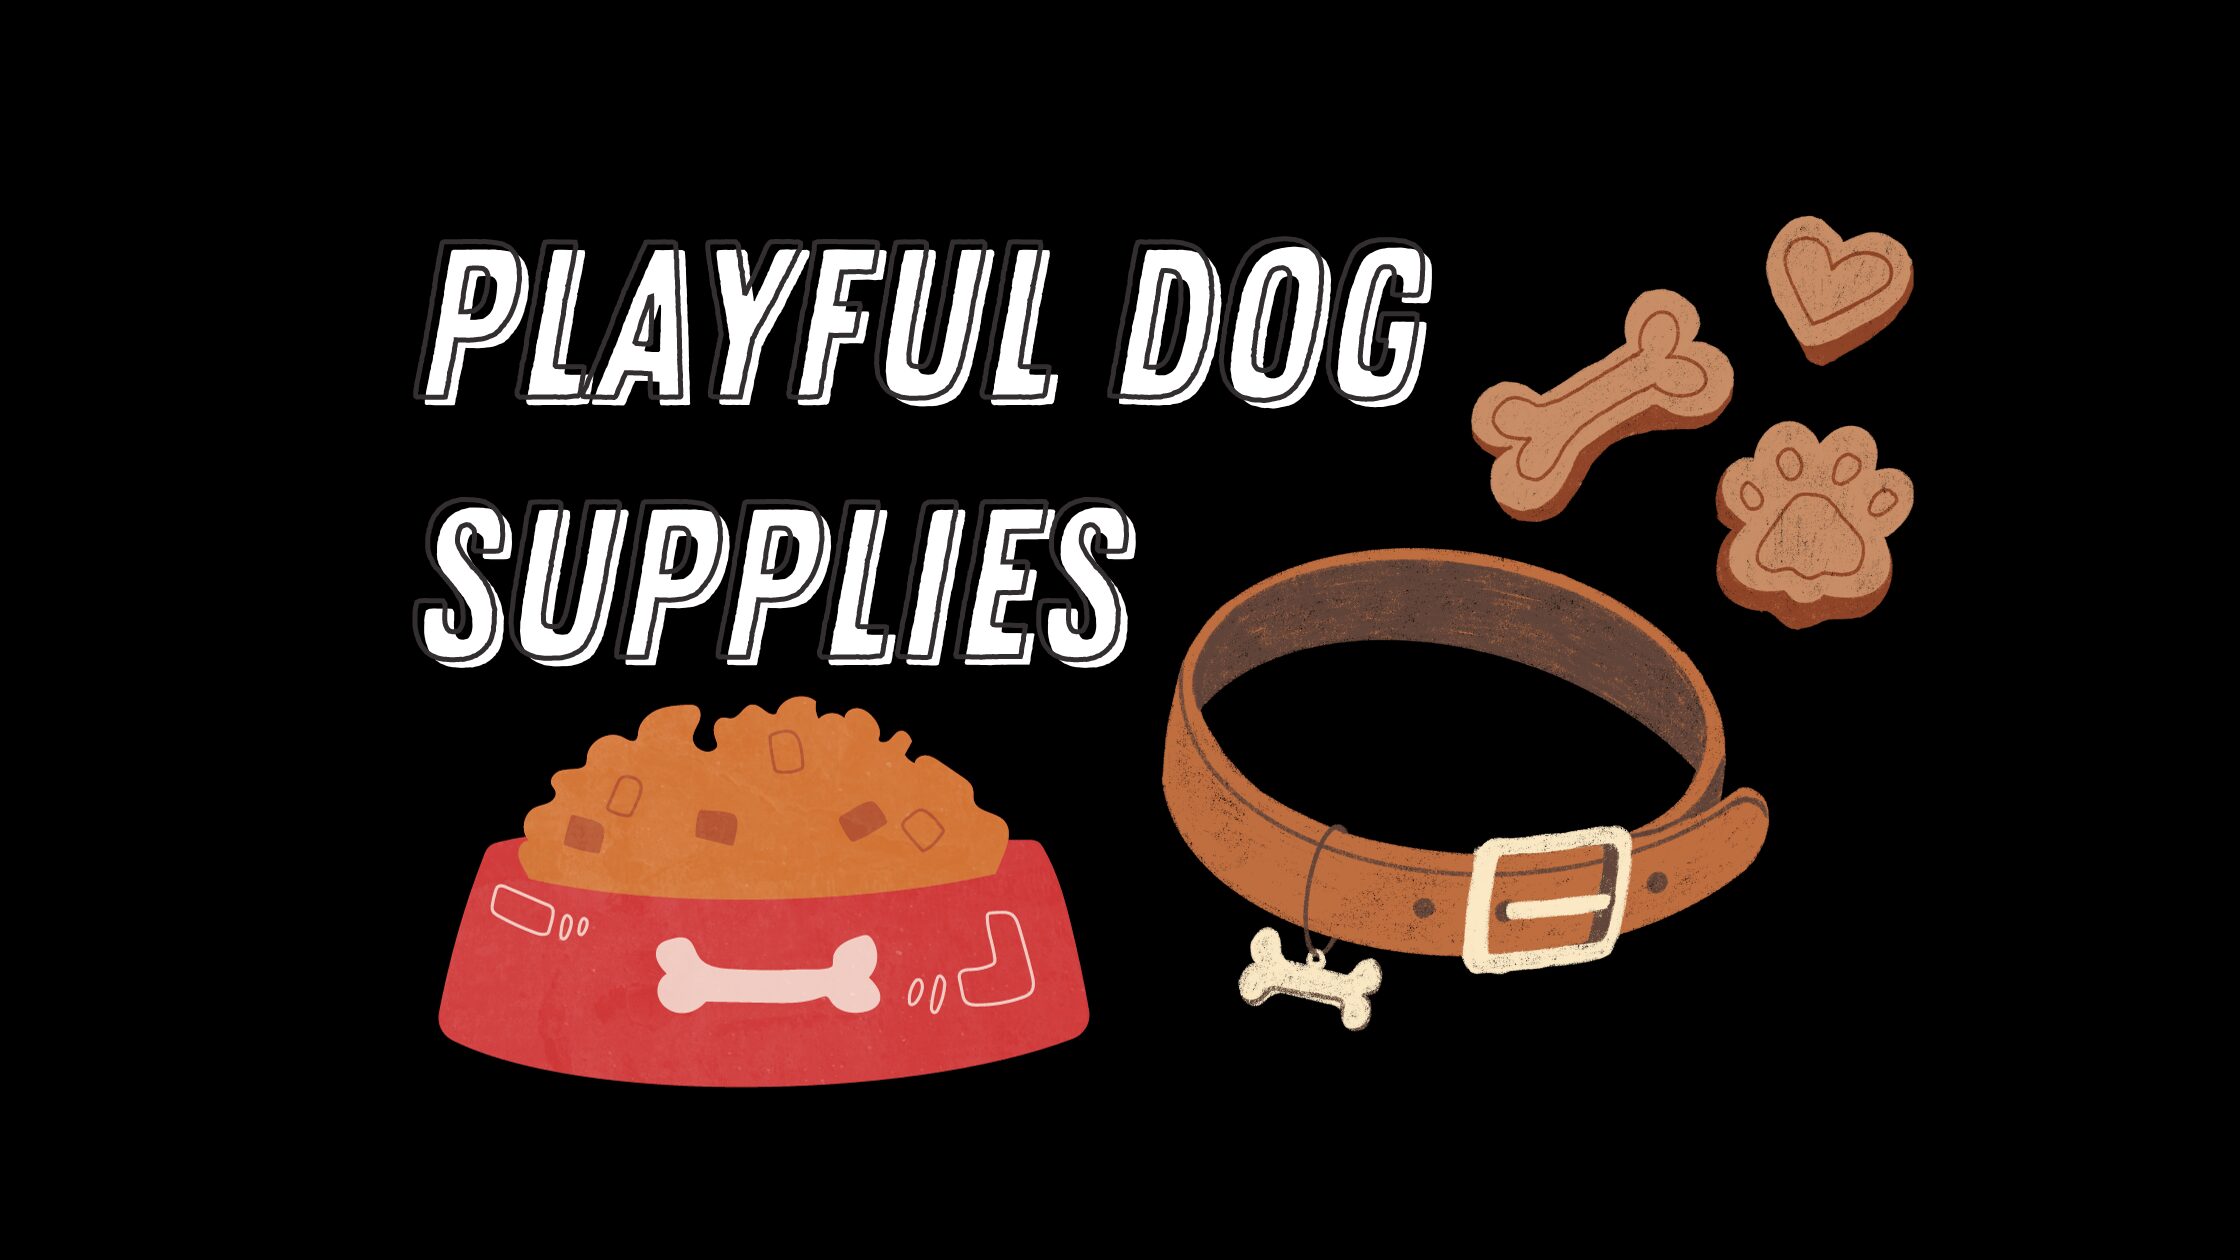 Spoil your furry friend with playful dog supplies they'll love! Discover essential gear, toys, & comforts for a happy, active pup. Unleash the fun & strengthen your bond.